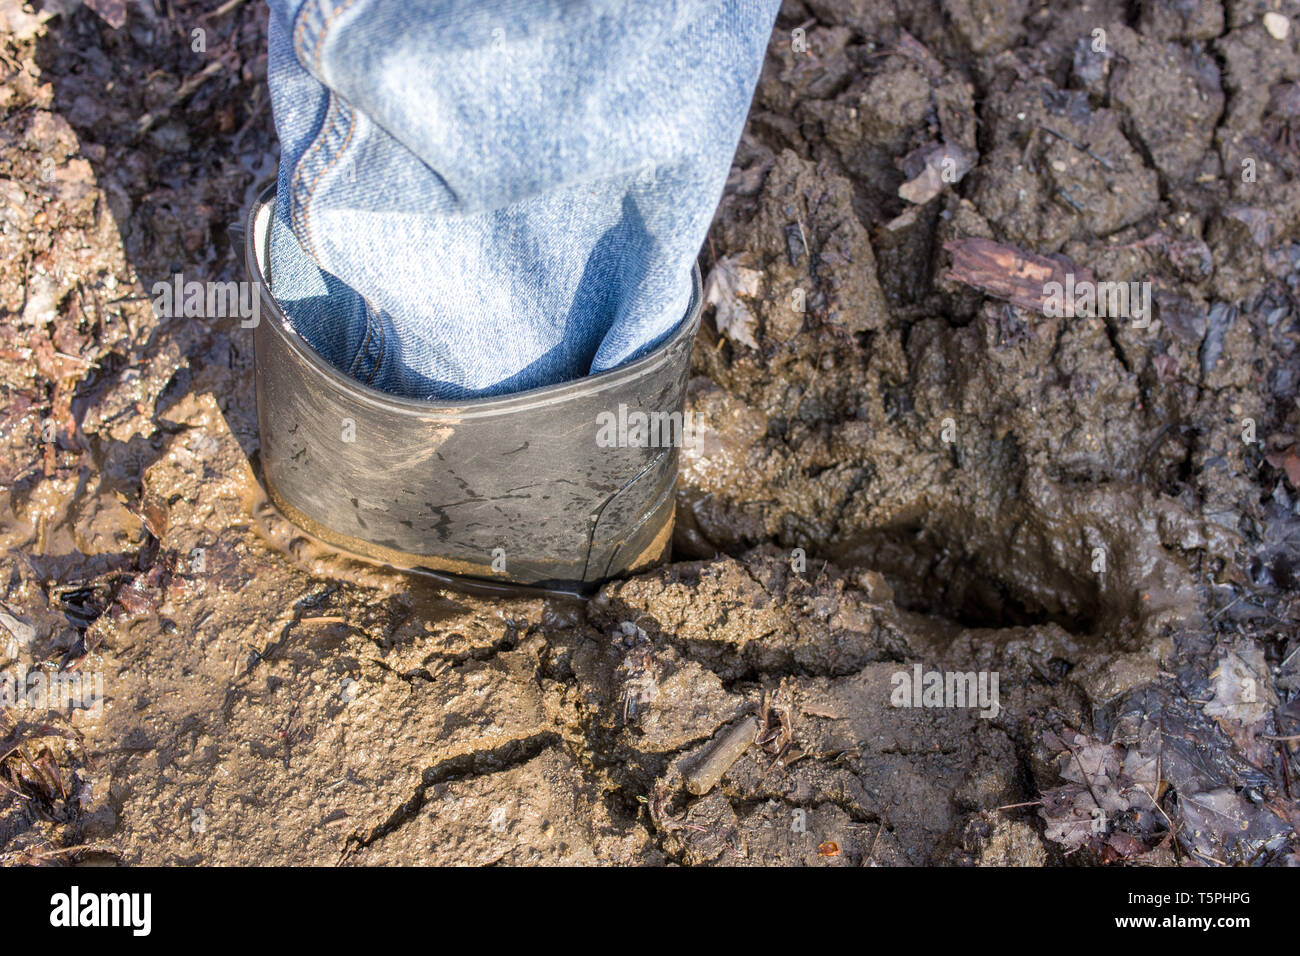 A stuck rubber boot after stepping in deep mud. Stock Photo